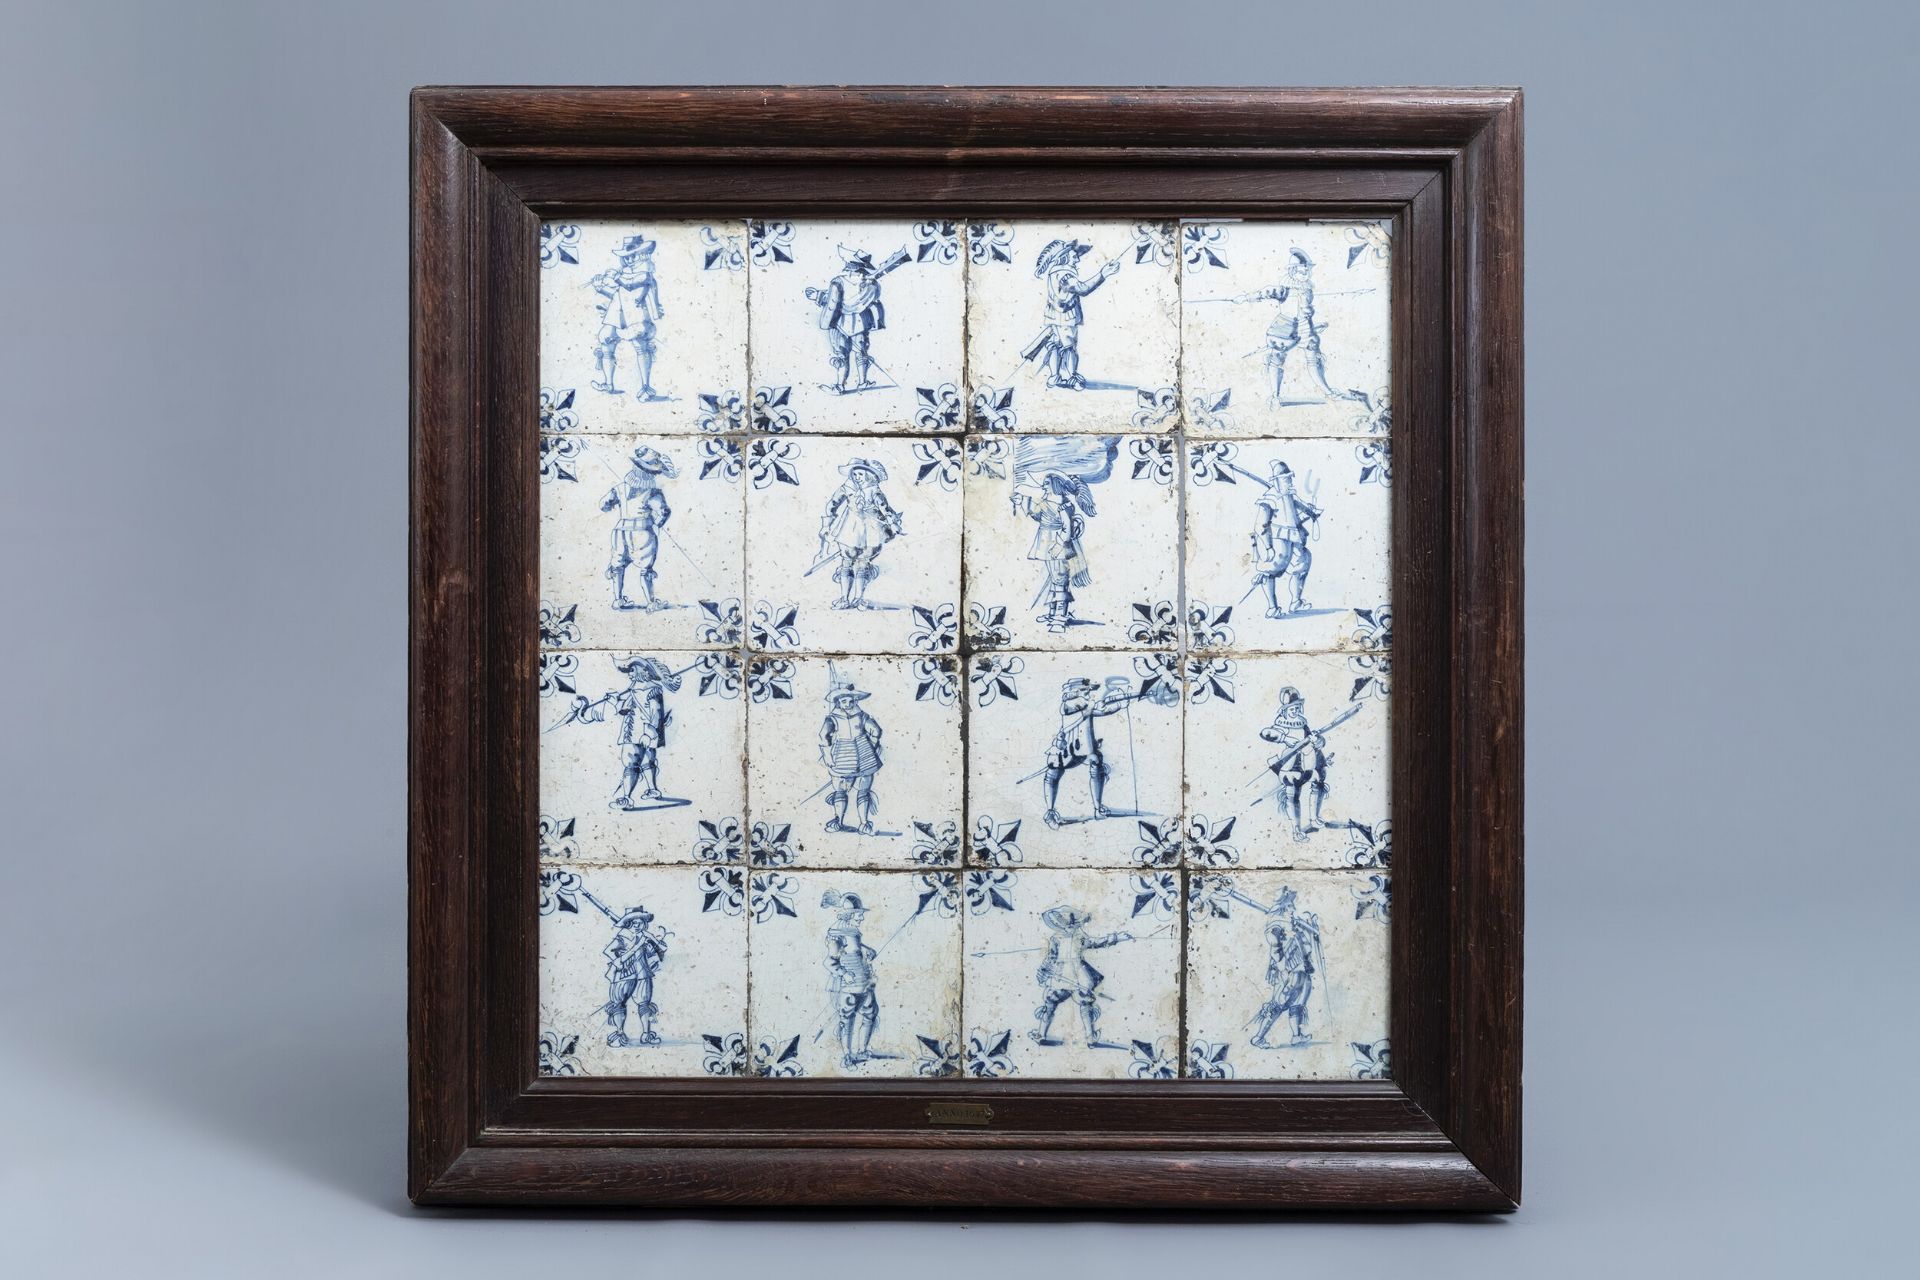 Sixteen Dutch Delft blue and white tiles with soldiers, 17th C.